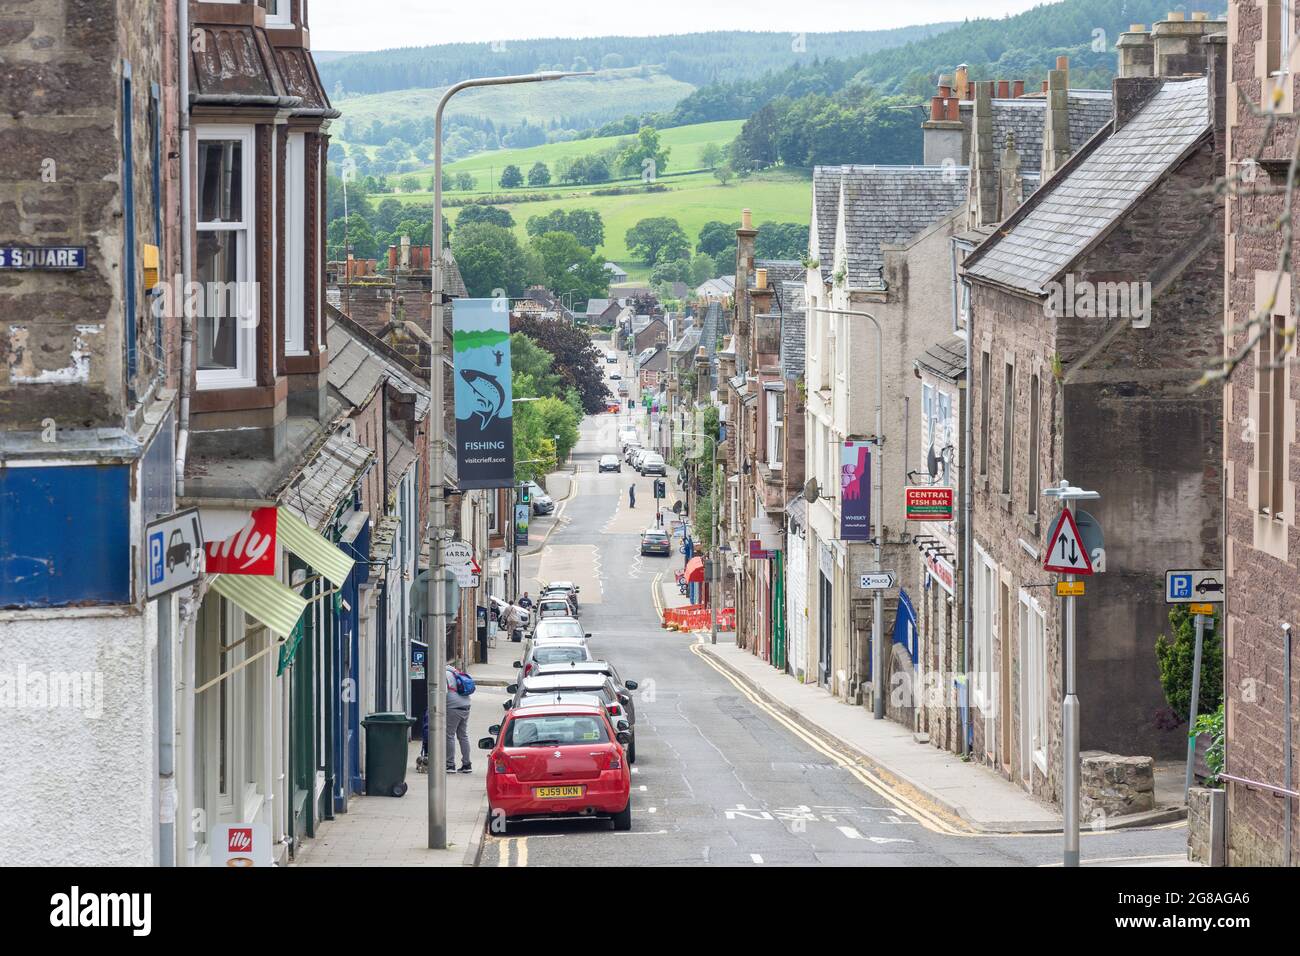 King Street from James Square, High Street, Crieff, Perth and Kinross, Scotland, United Kingdom Stock Photo